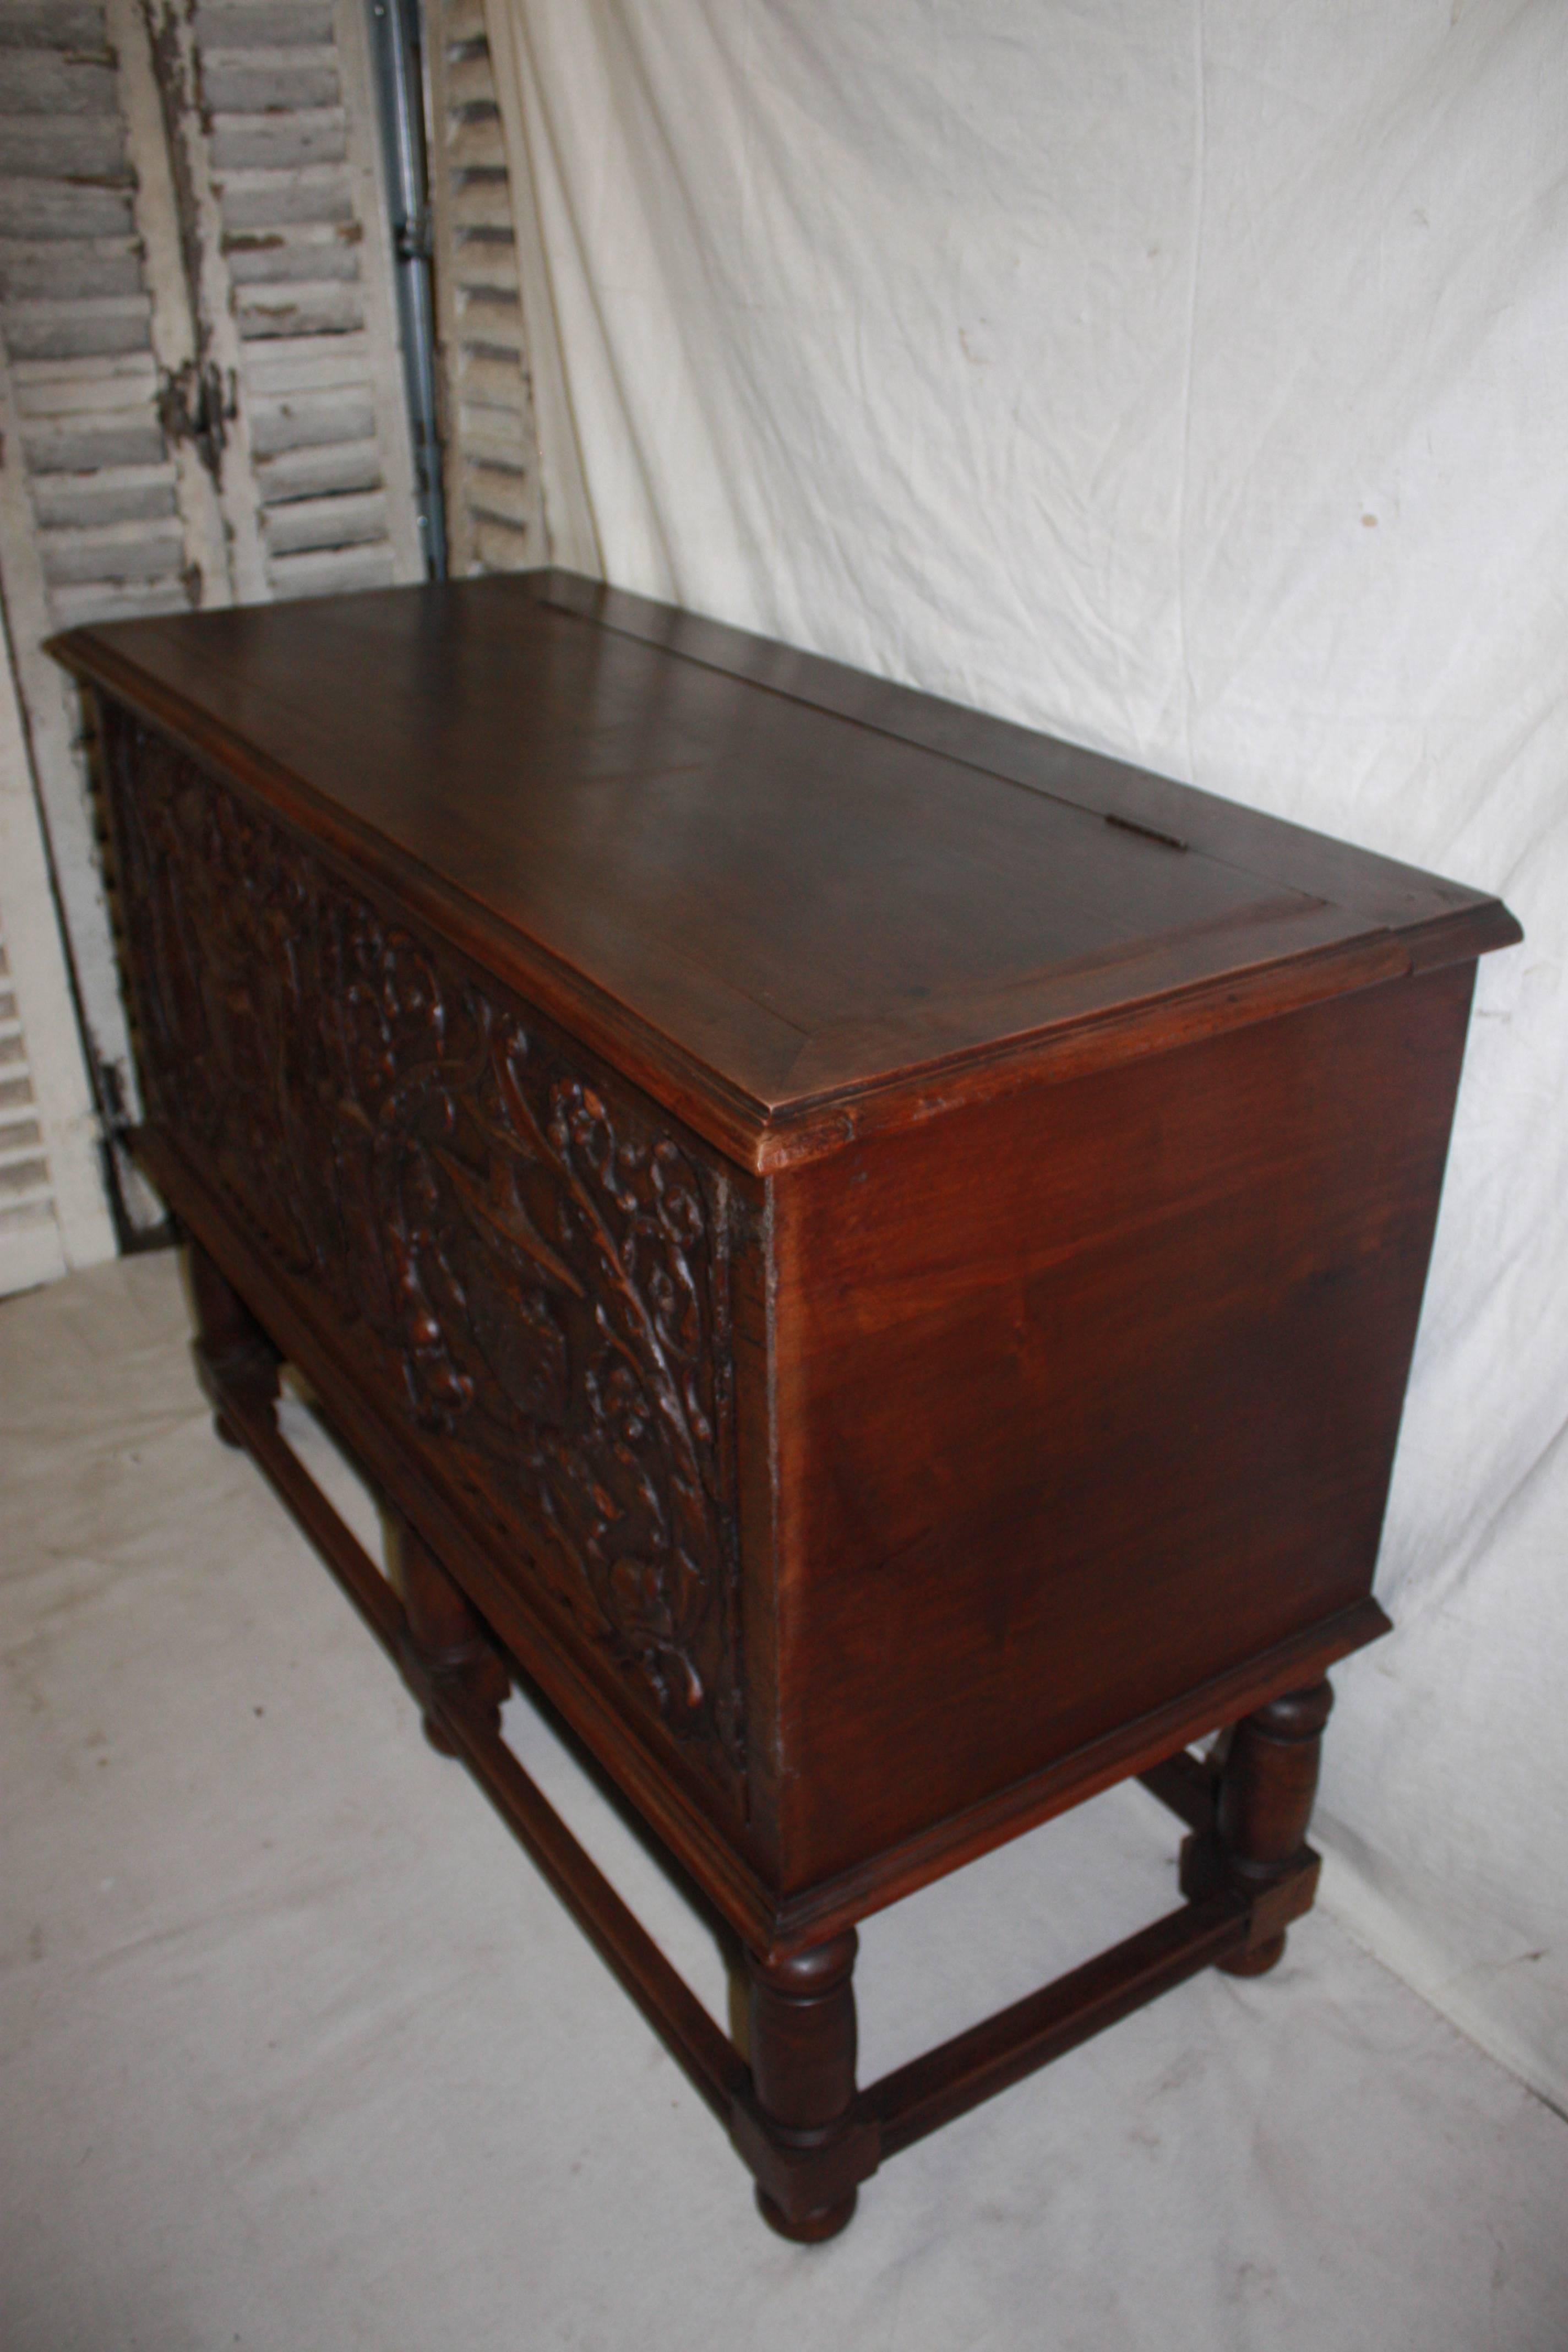 19th century French trunk.